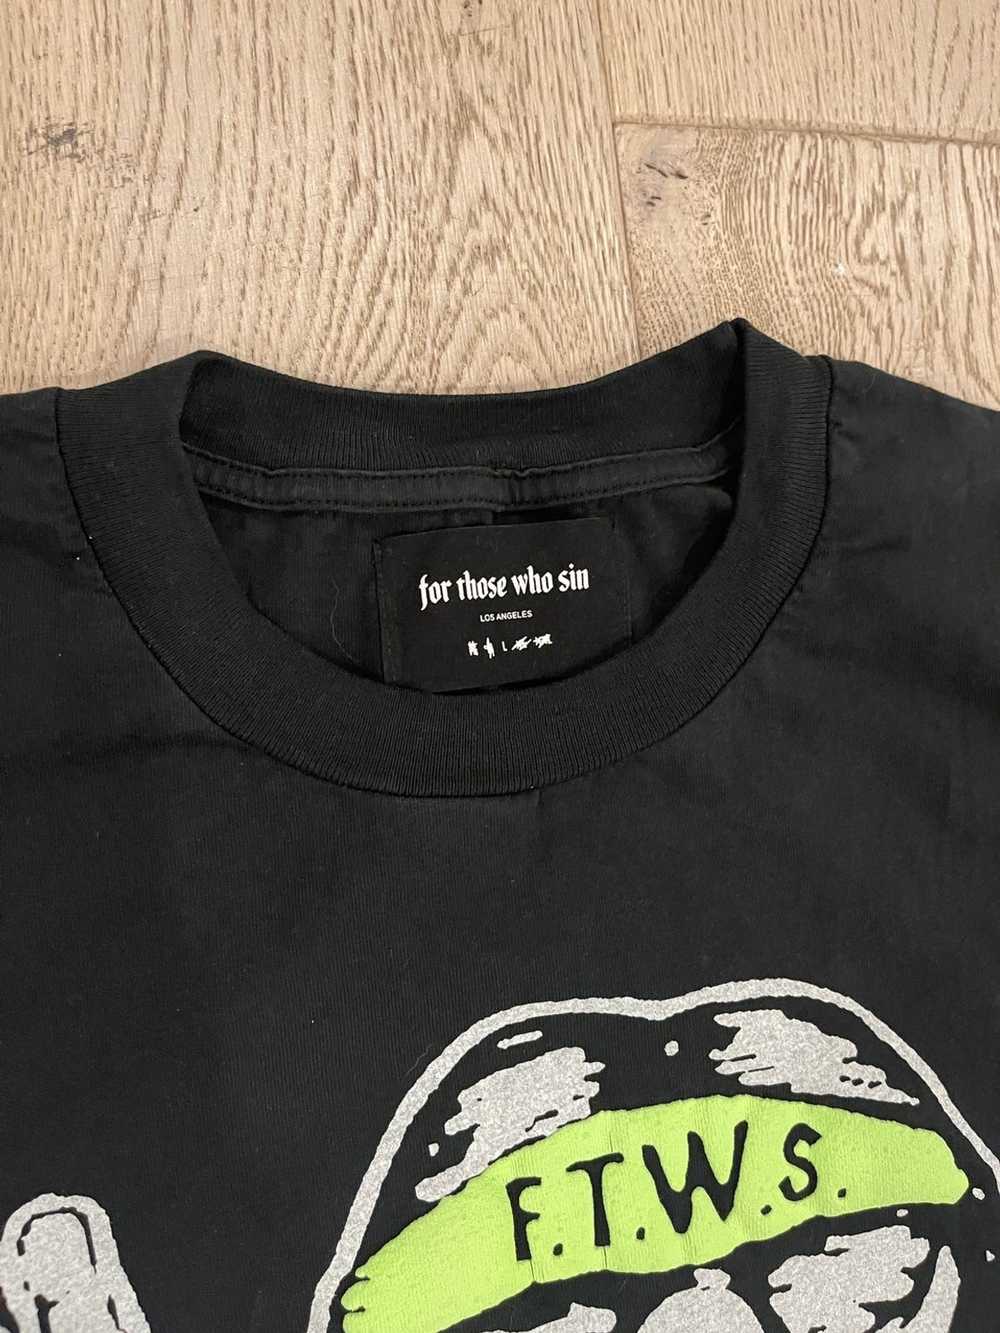 For those who sin ass cash or grass tee - image 3